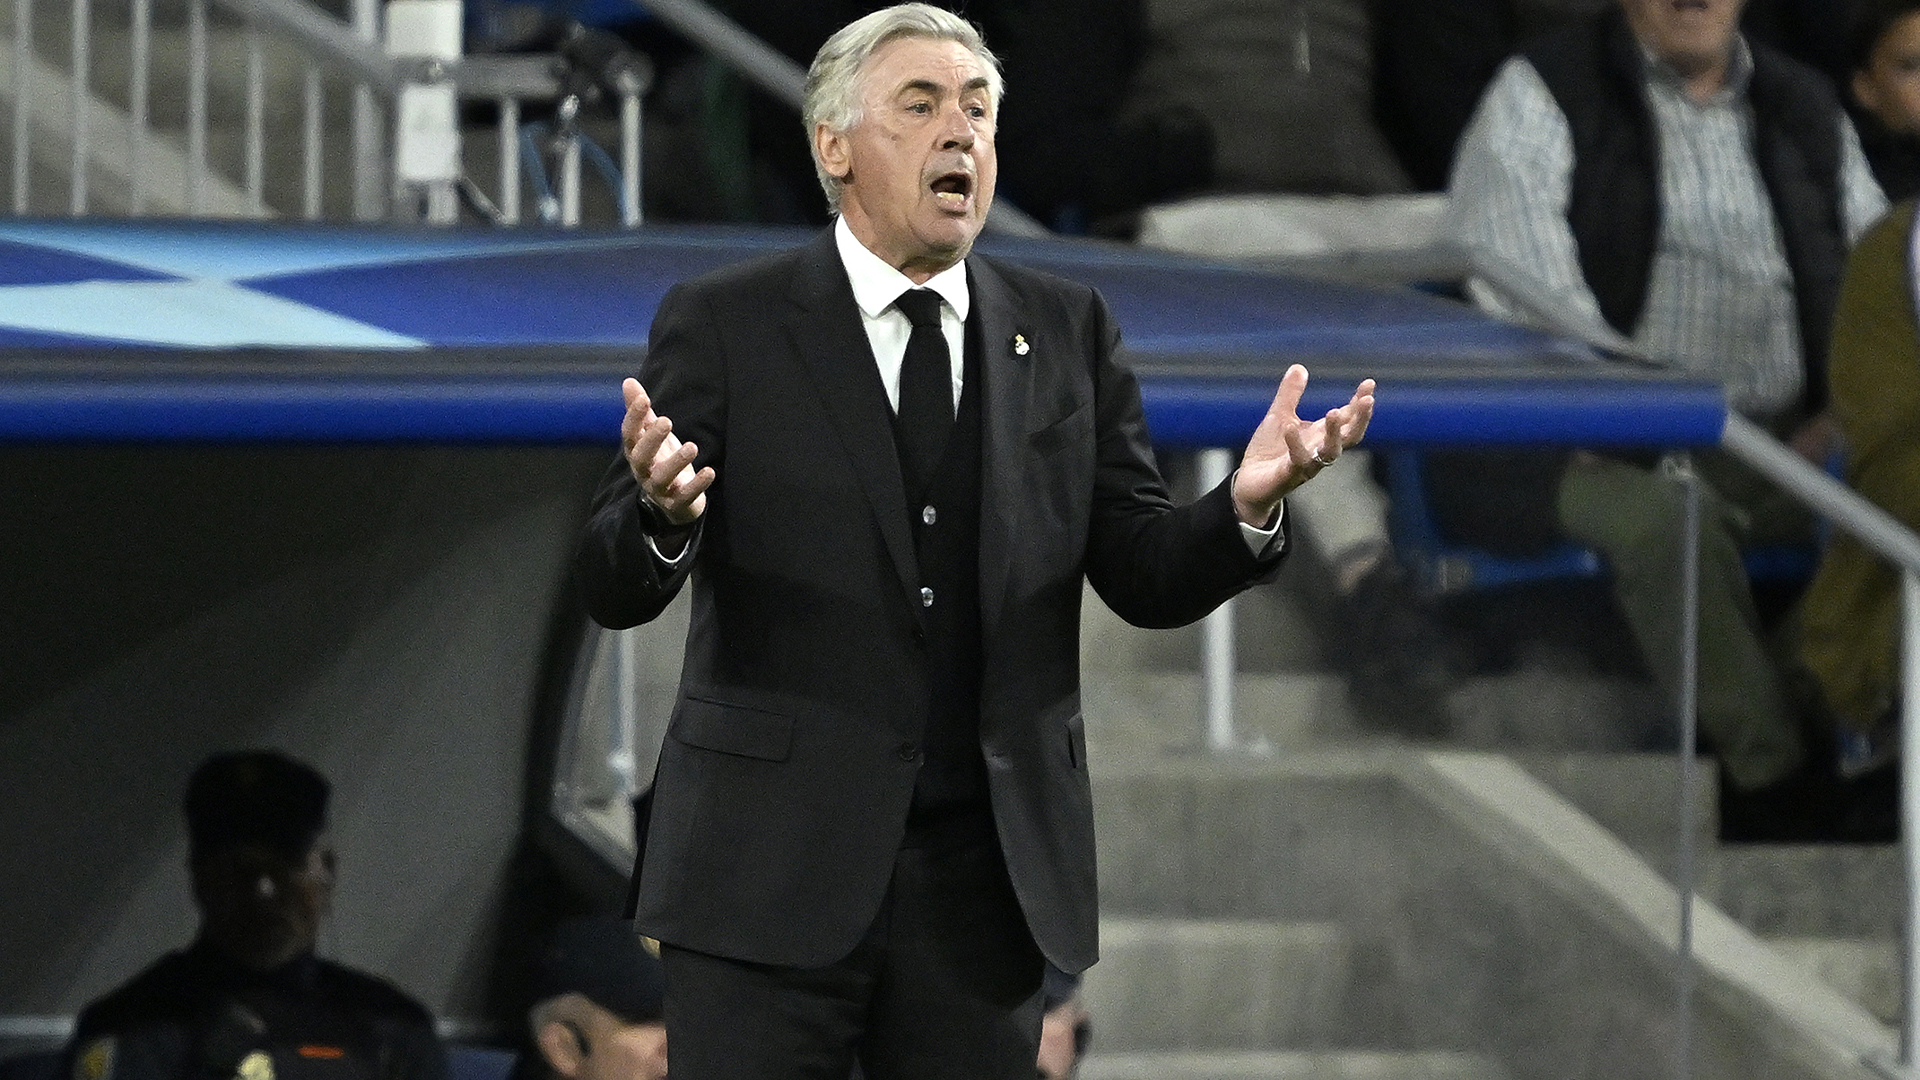 Carlo Ancelotti’s genius tactics brutally expose Chelsea star as Real Madrid ‘eat him up’ for both goals